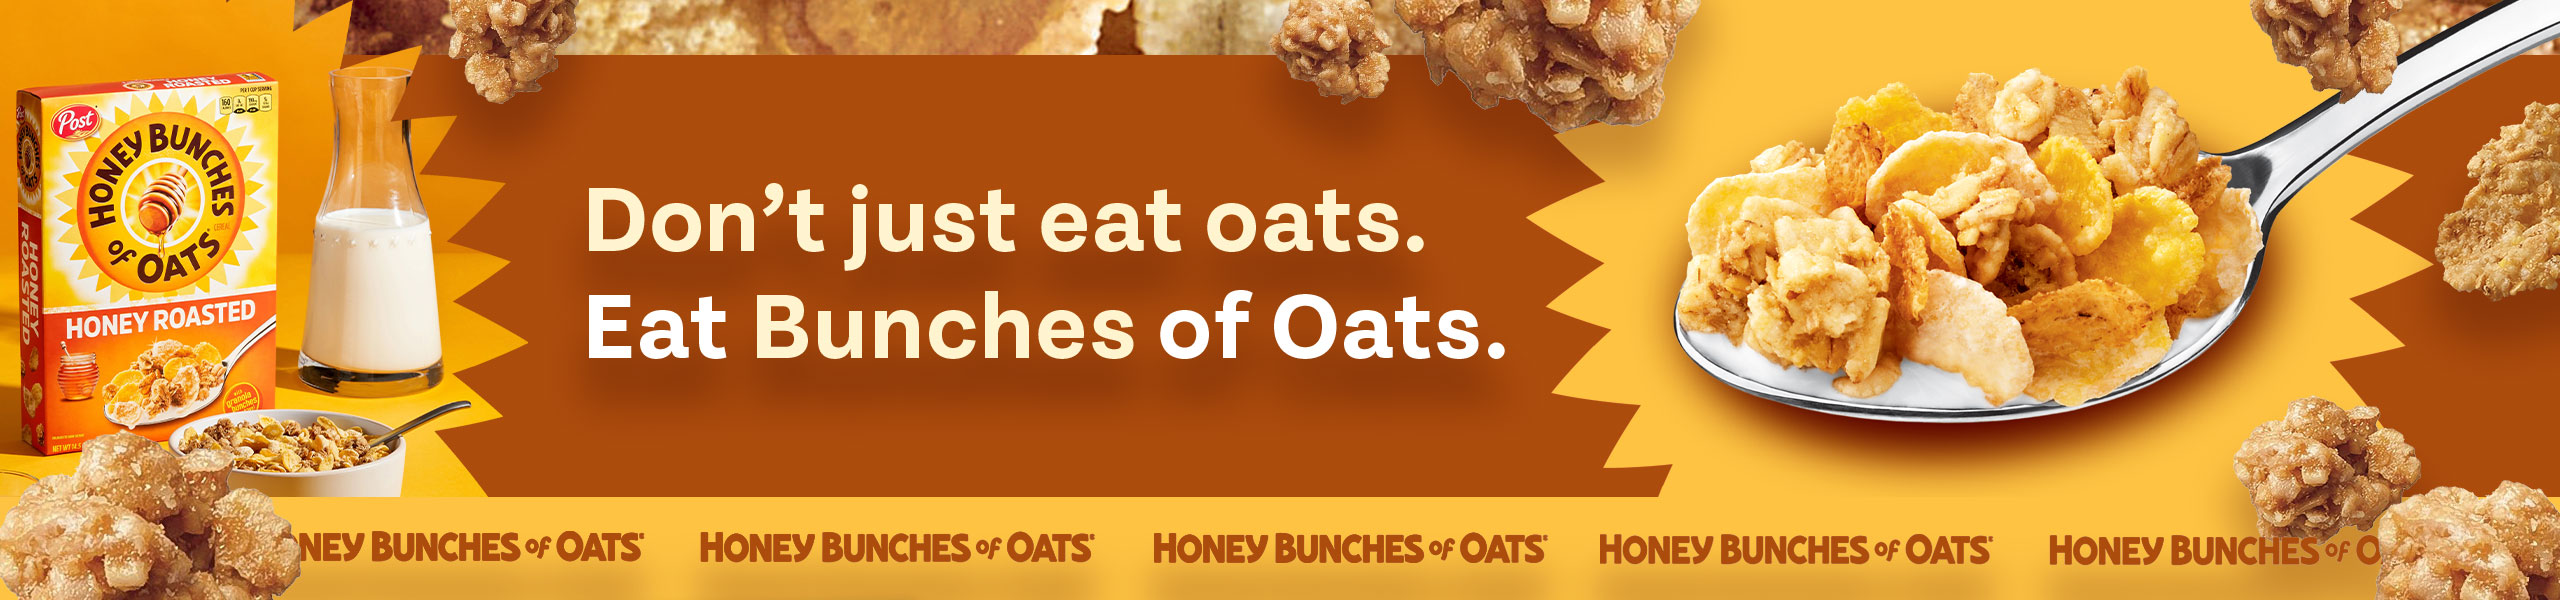 Don't just eat oats. Eat Bunches of Oats.